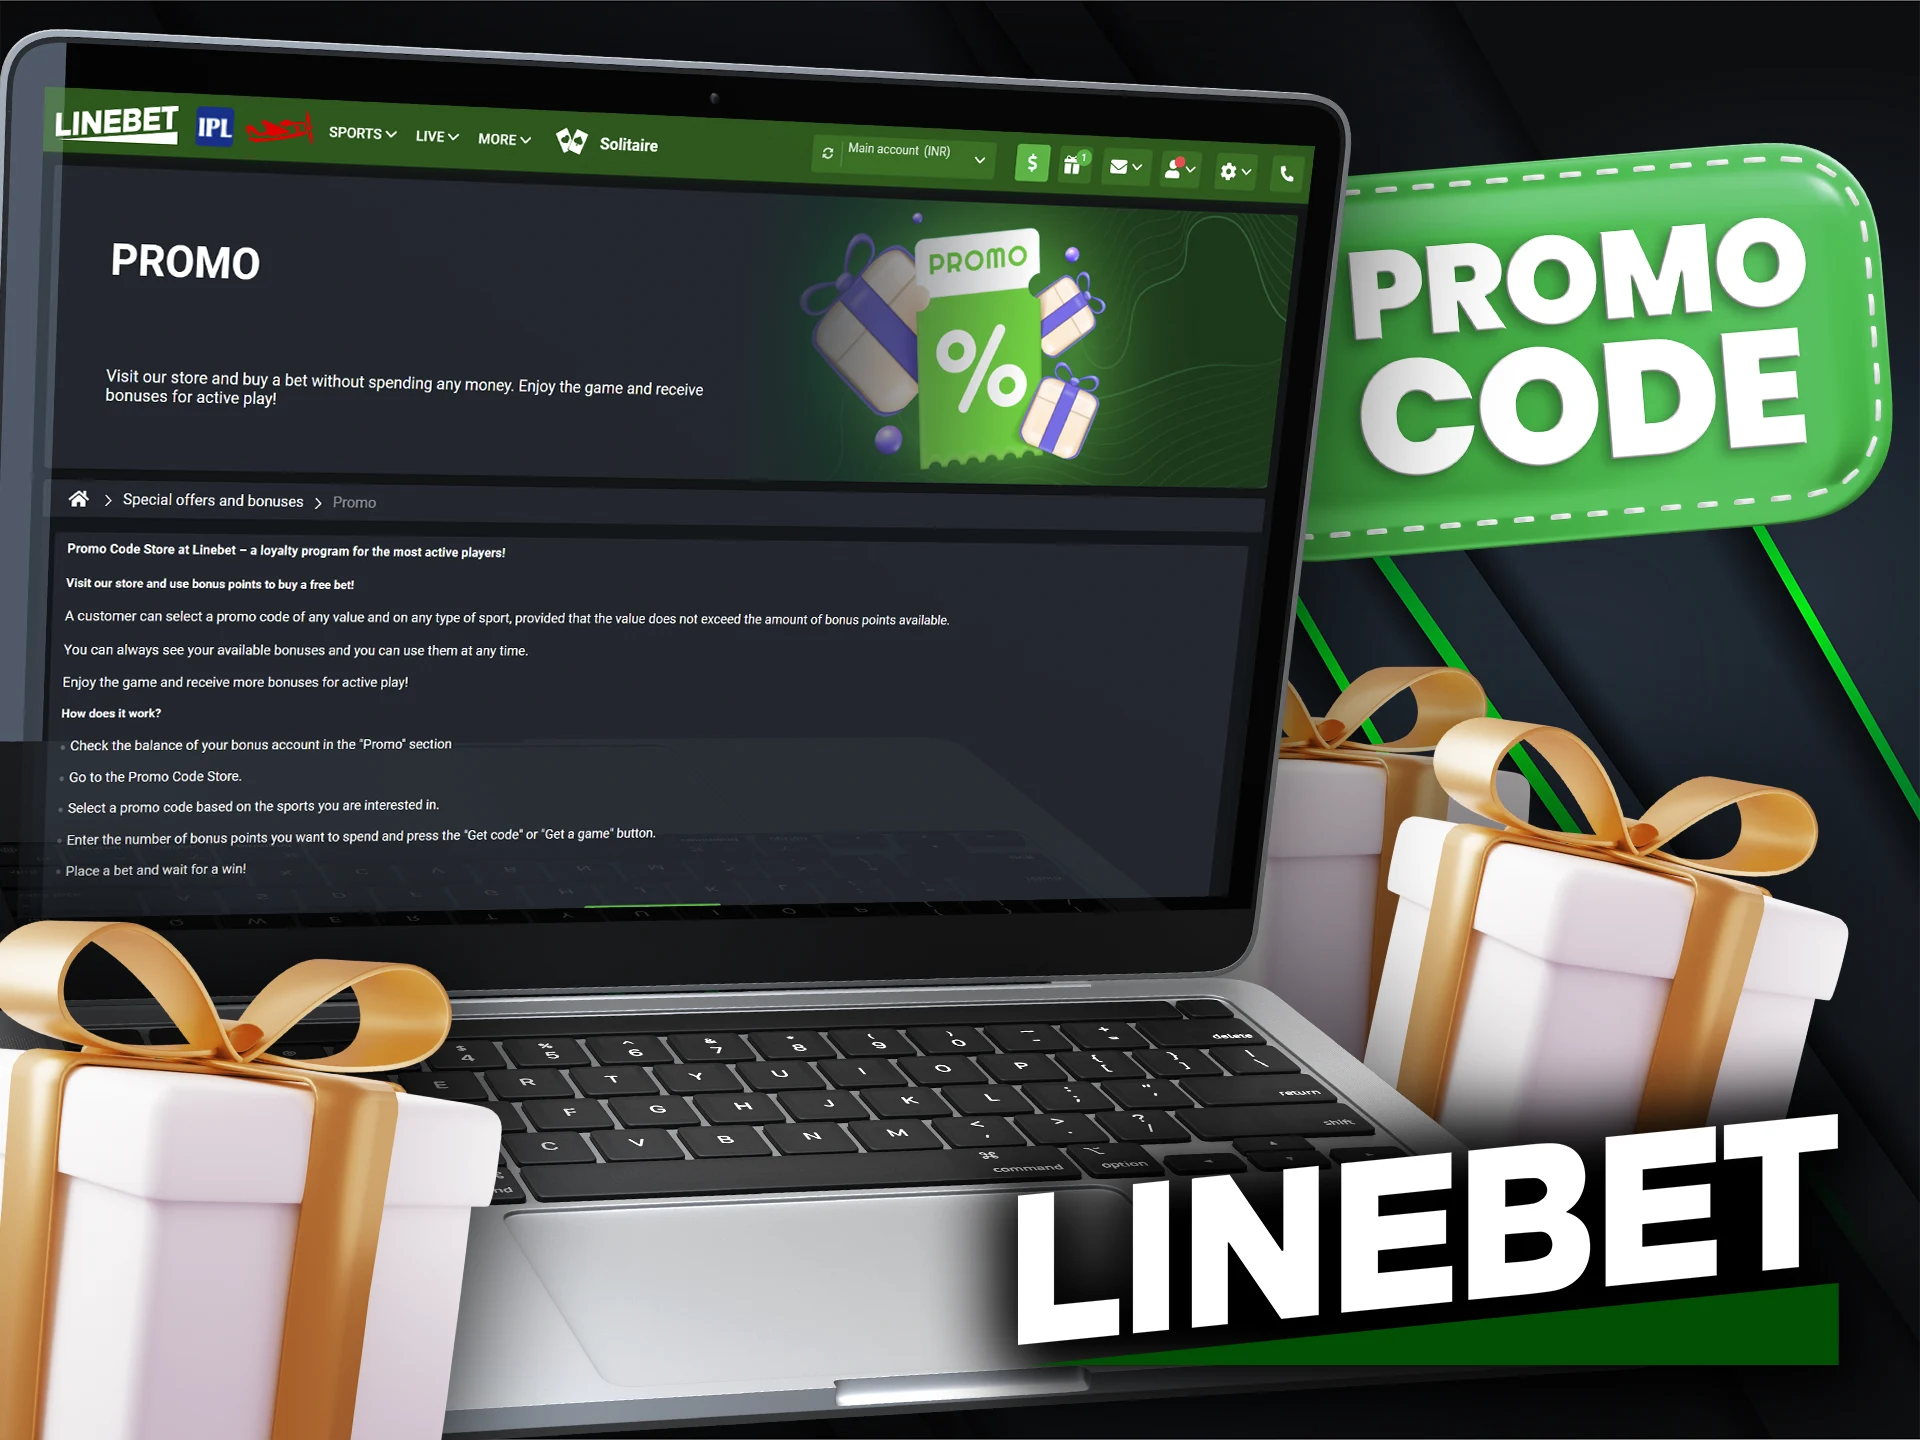 Place your bets, get bonus points and go to the Linebet Promo Code Store.